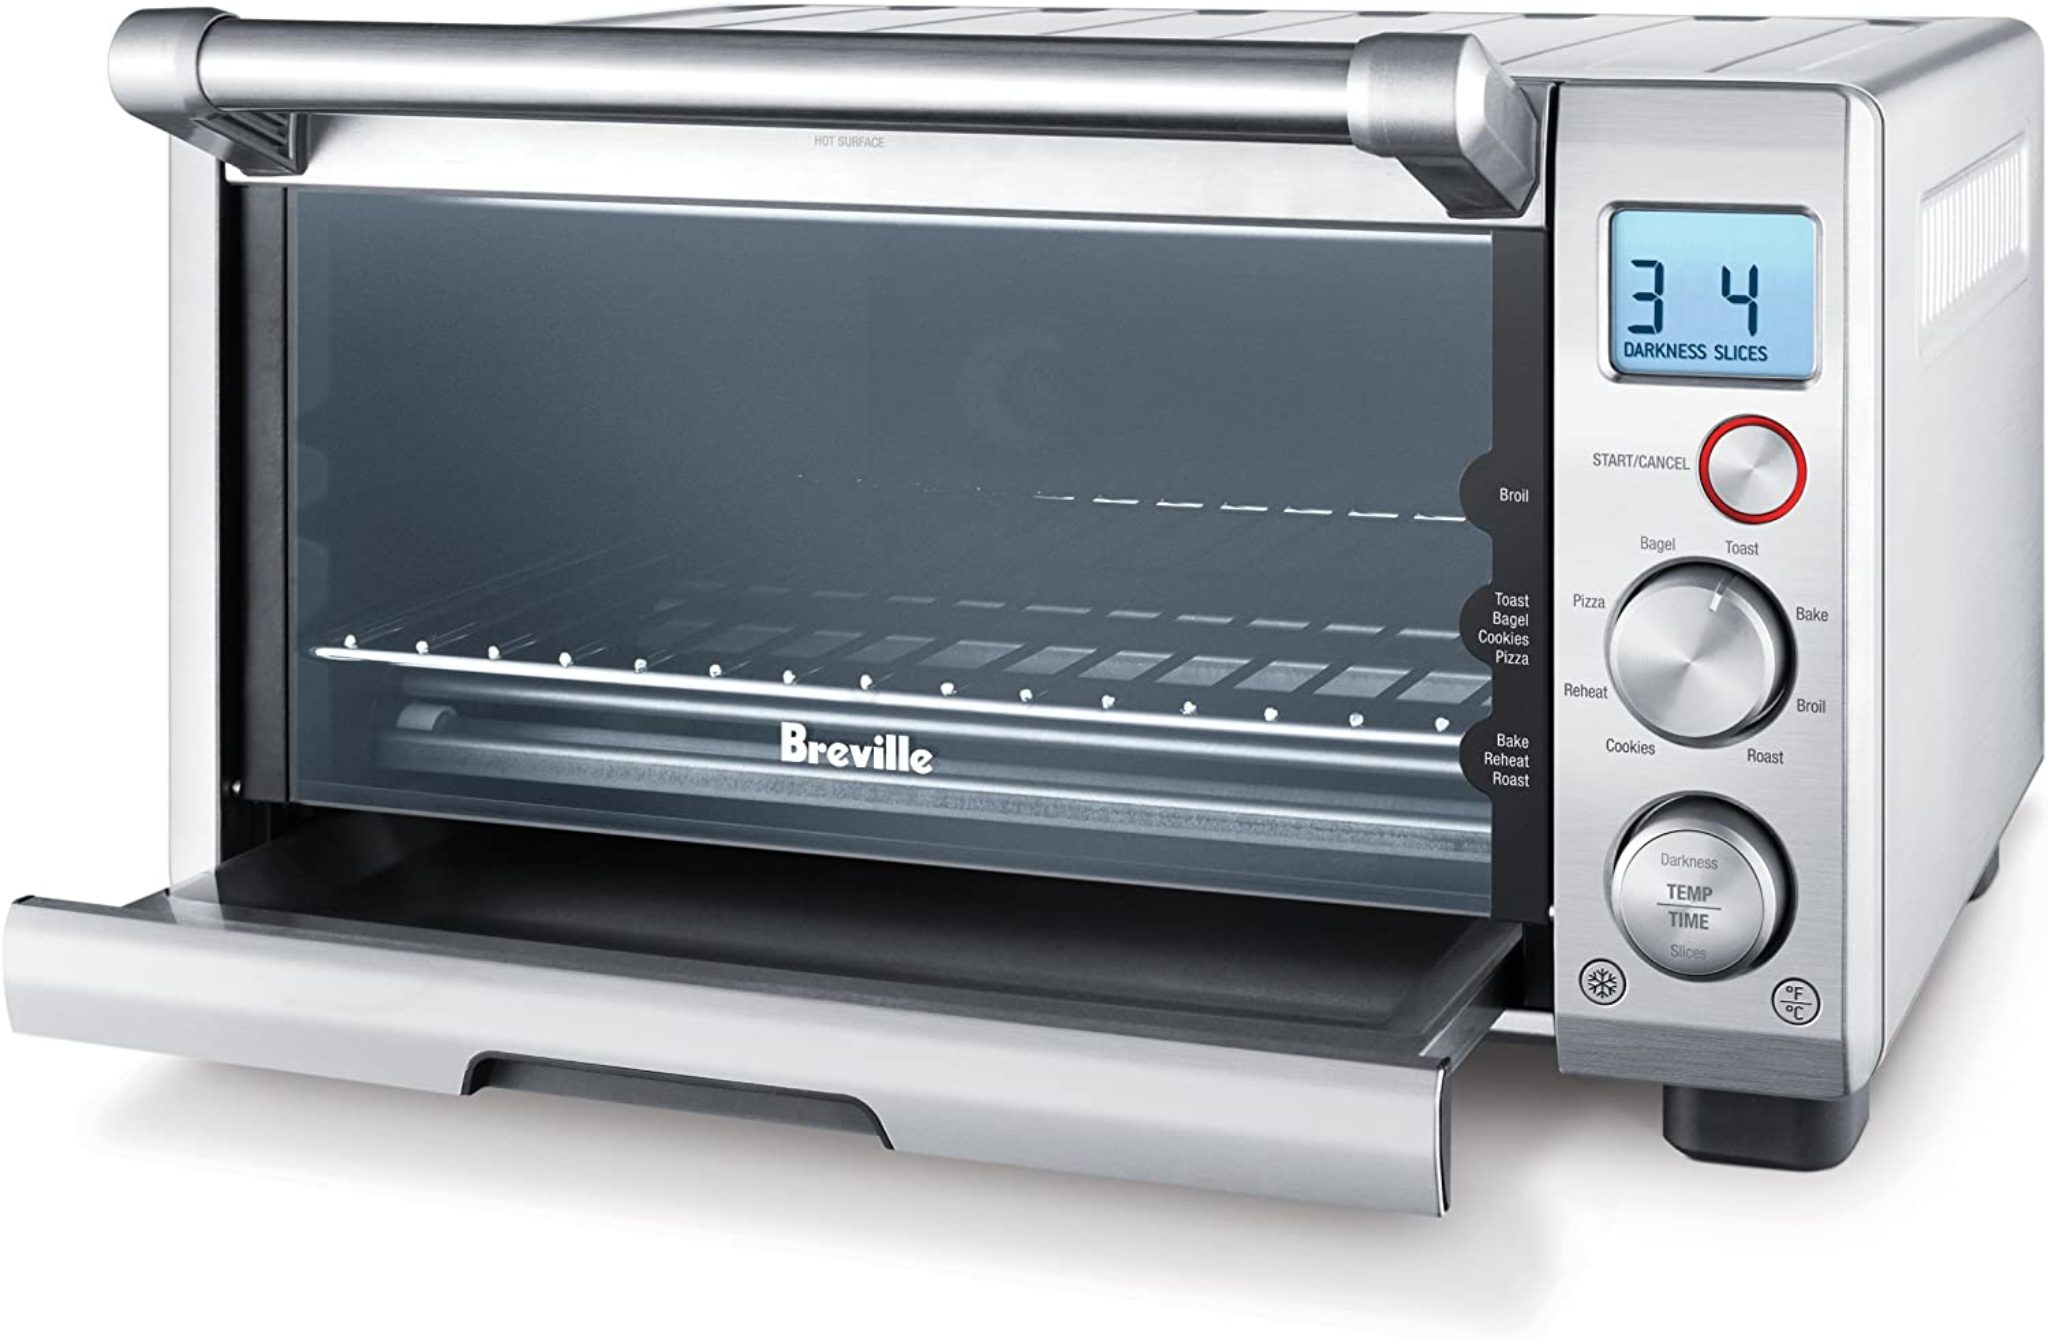 Don’t Miss Out: This Highly-Rated Compact Smart Oven Is Nearly 20% Off